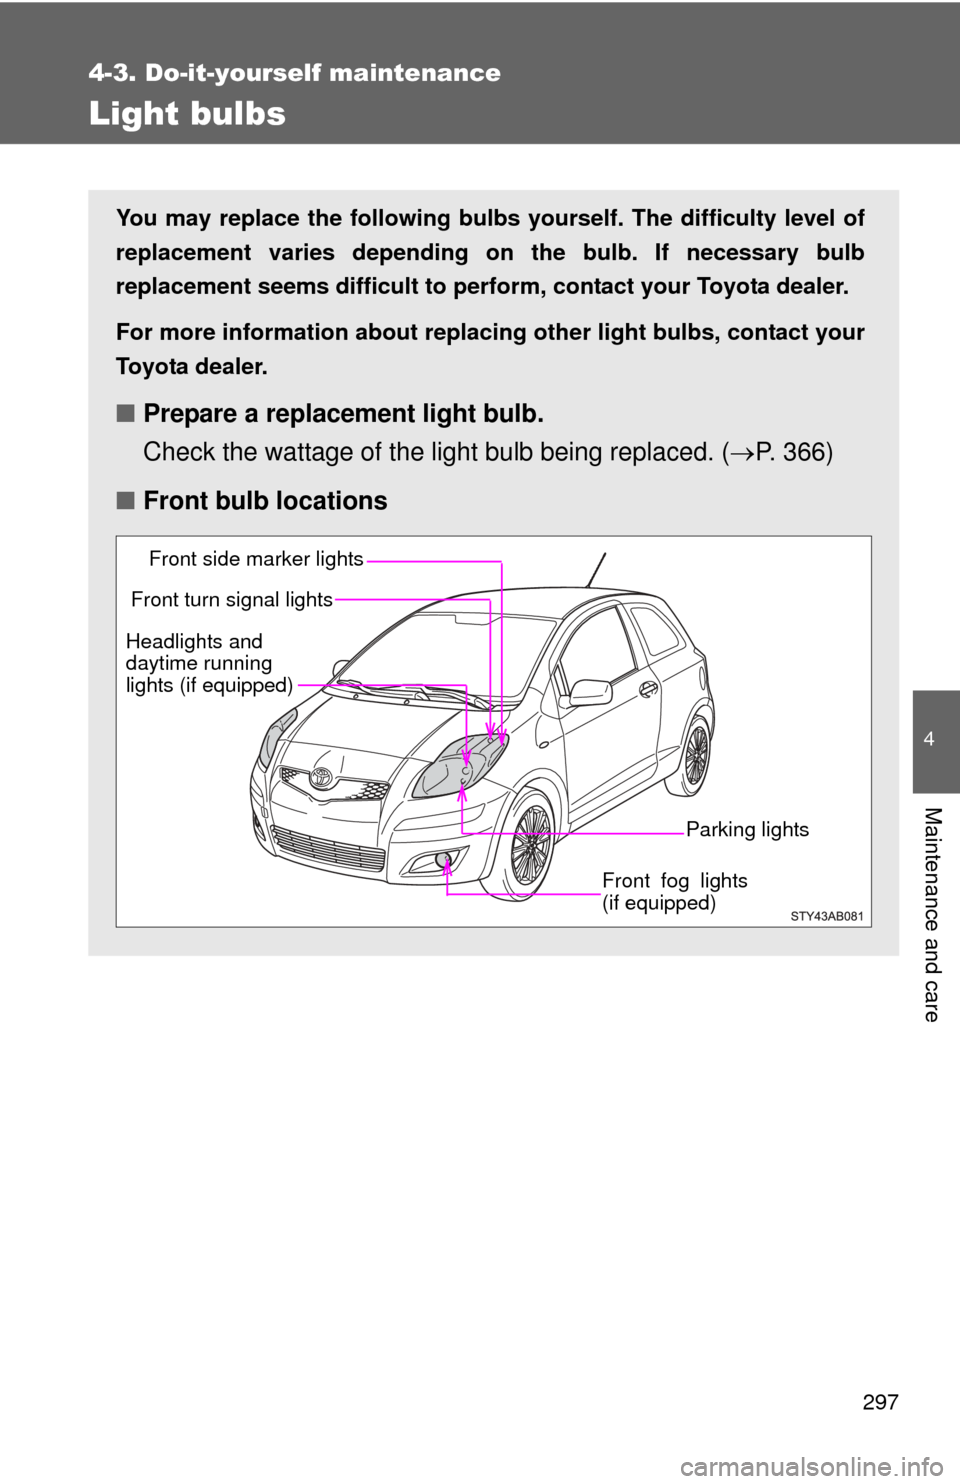 TOYOTA YARIS 2011 3.G Owners Manual 297
4-3. Do-it-yourself maintenance
4
Maintenance and care
Light bulbs
You may replace the following bulbs yourself. The difficulty level of
replacement varies depending on the bulb. If necessary bulb